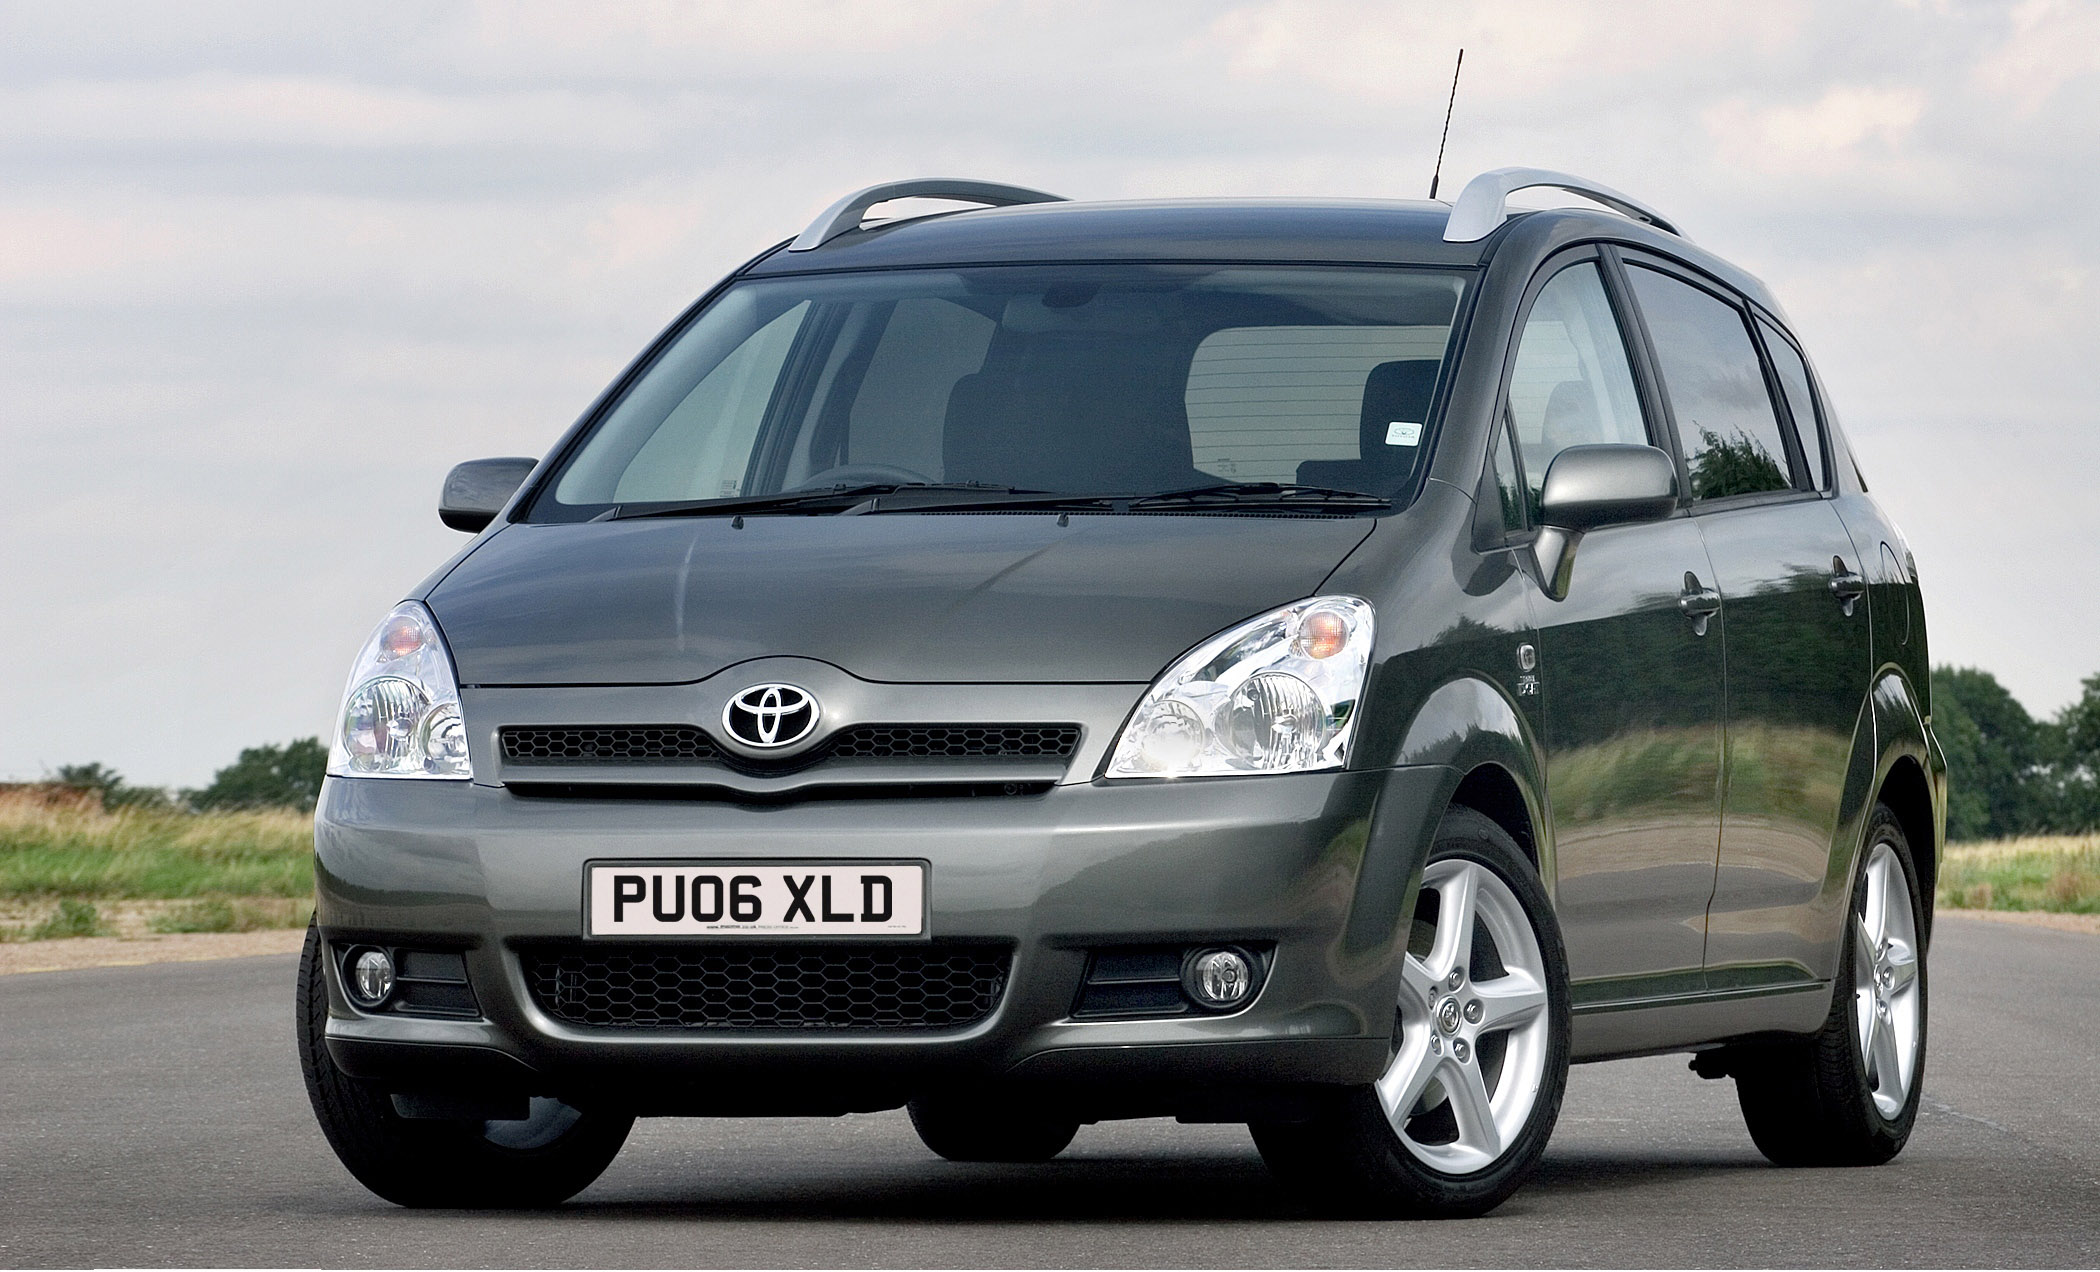 Toyota Verso 2005 Review, Amazing Pictures and Images